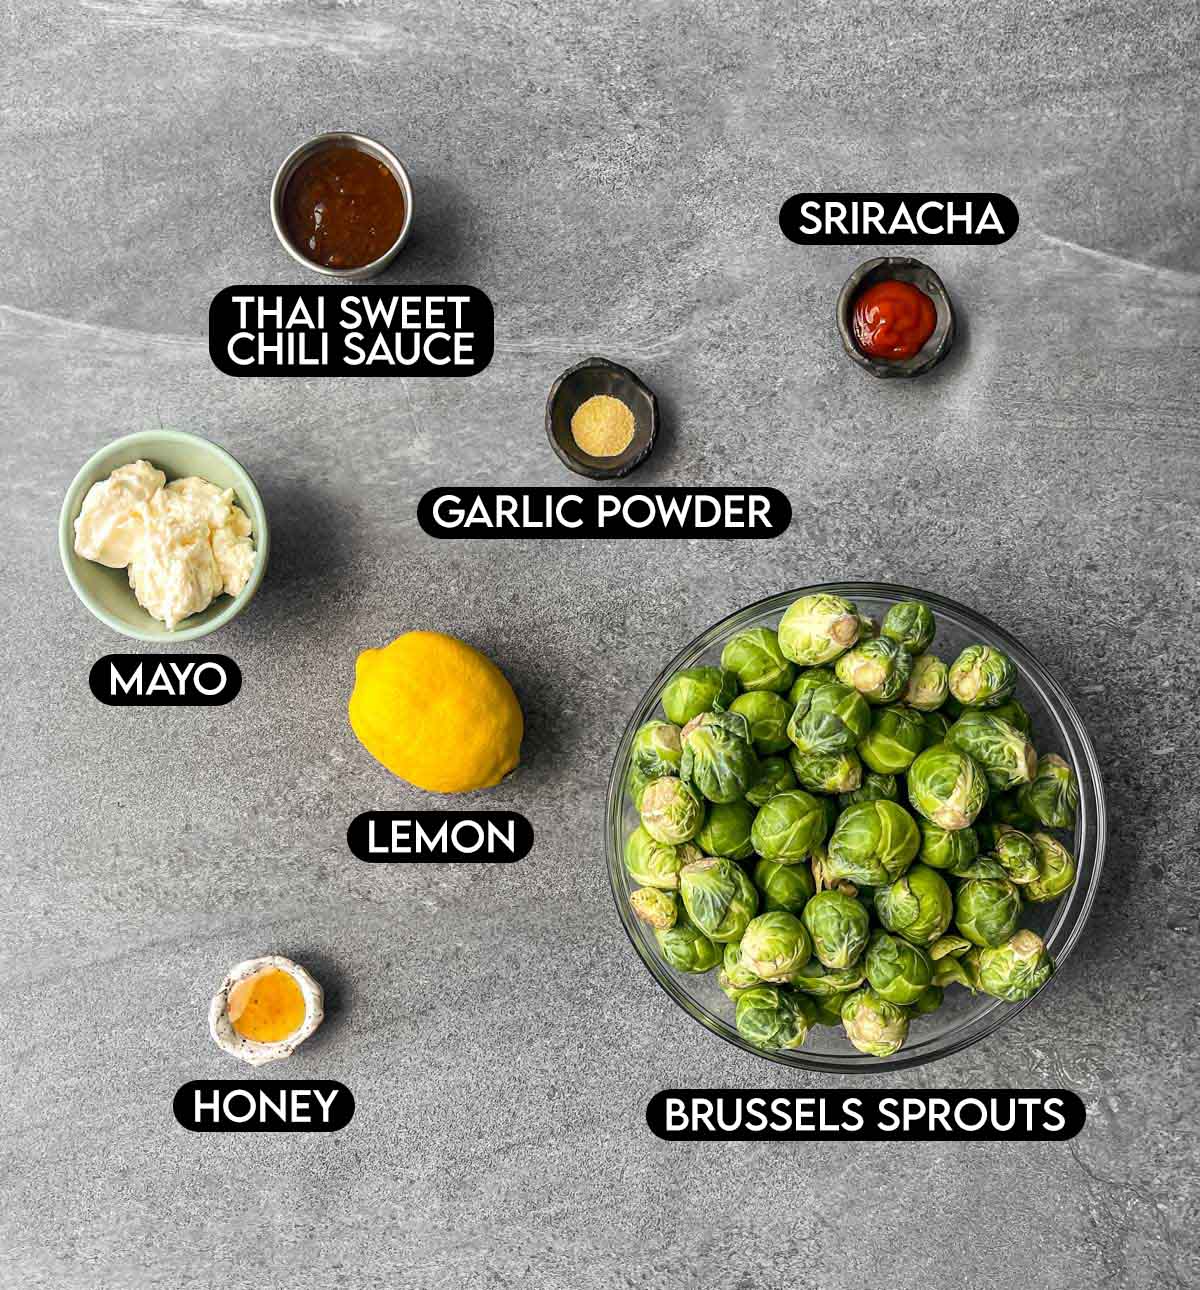 Labeled ingredients for bang bang brussels sprouts: thai sweet chili sauce, sriracha, garlic powder, mayo, lemon, honey, and brussels sprouts.